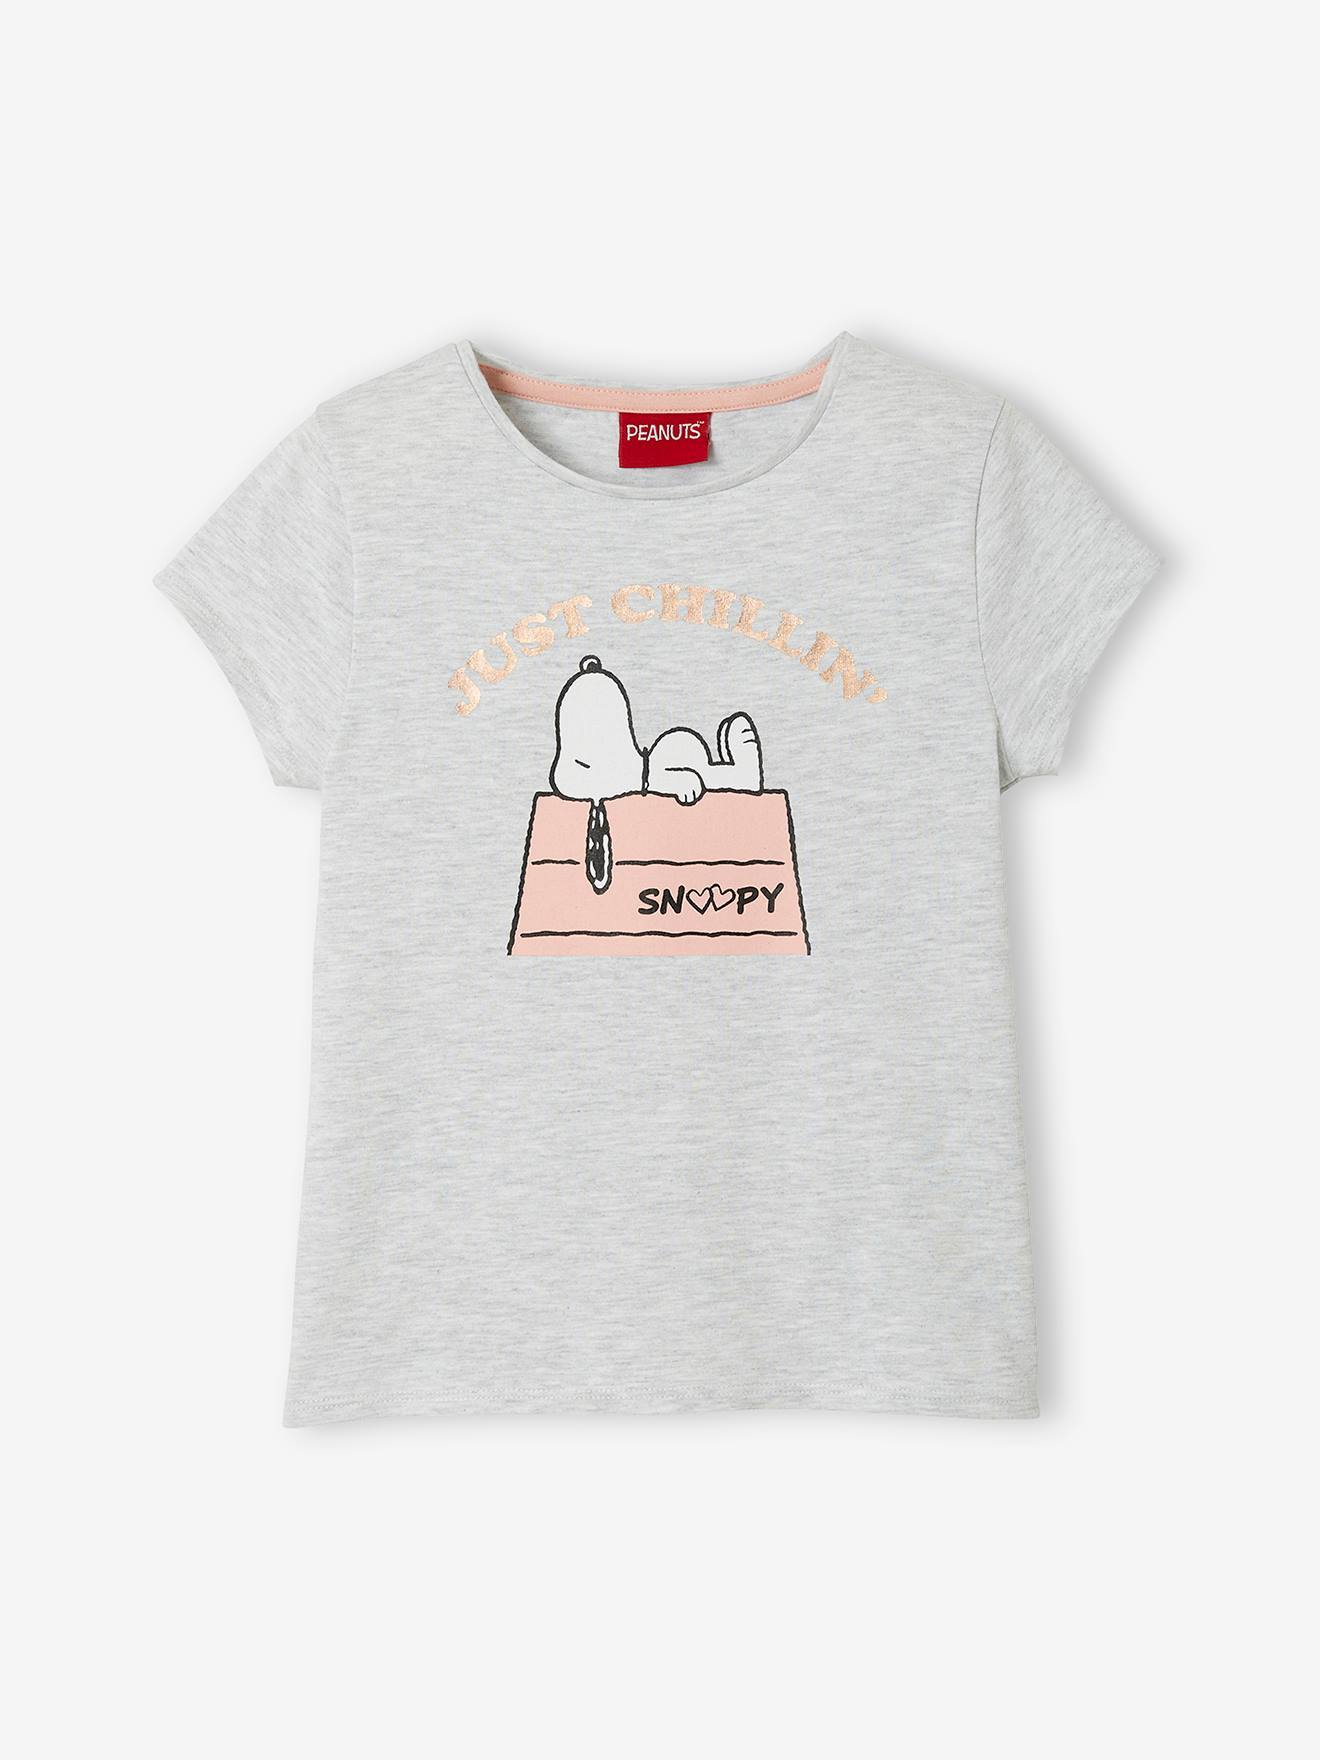 Snoopy by Peanuts(r) T-shirt for Girls grey light solid with design